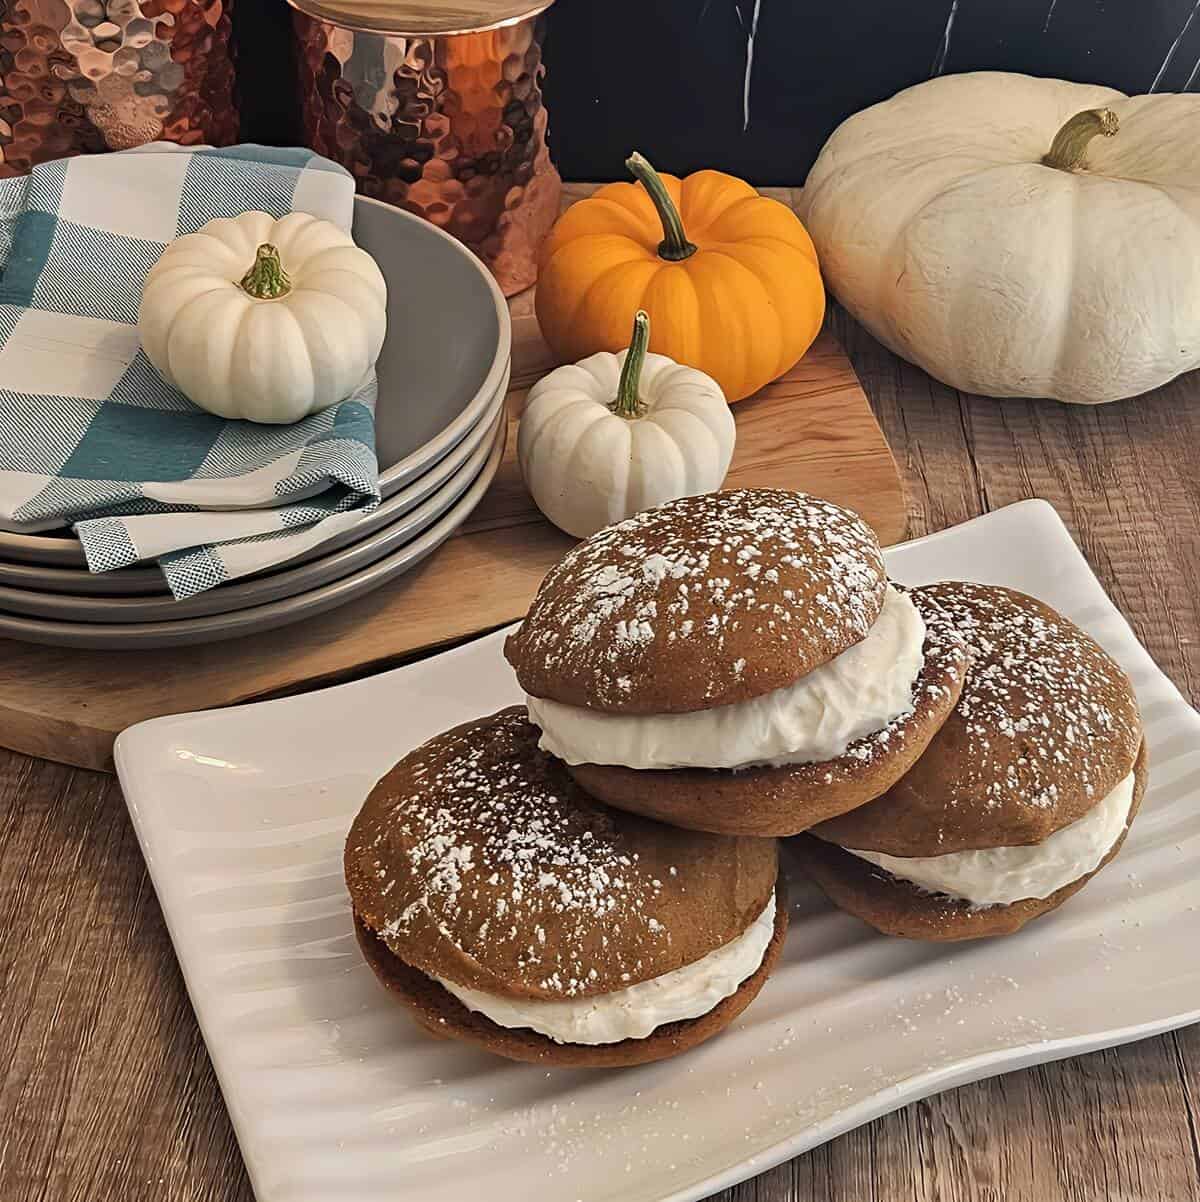 finished whoopie pies, small round cakes with cream cheese filling in between, on plate stacked on top of each other, topped with powdered sugar, fall decorations.